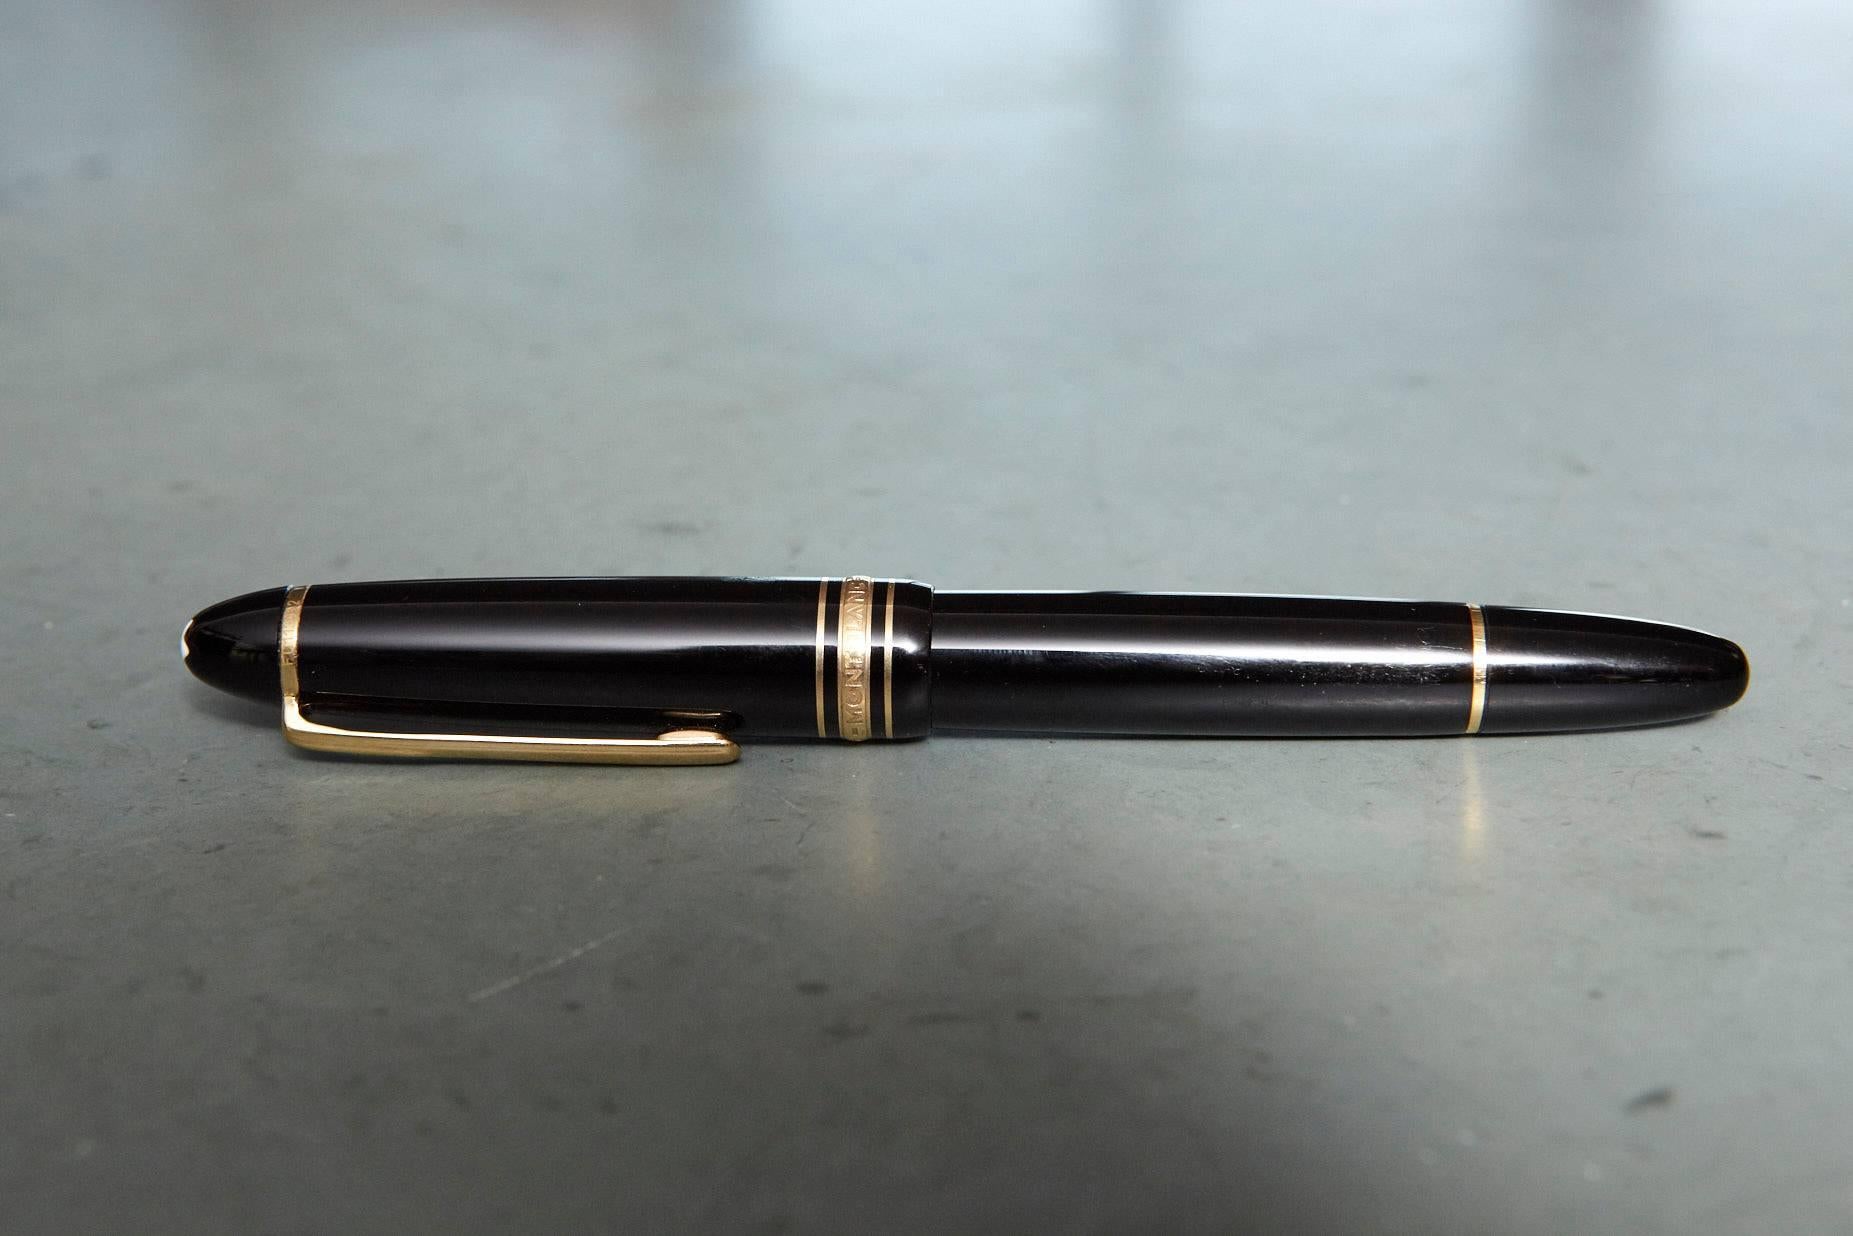 Montblanc Meisterstück fountain pen with an 18-karat gold nib, dating to, circa 1970. The gold cap ring is marked: Montblanc, Meisterstück, No. 146. The gold nib is marked with the Montblanc logo, 4810, 18-karat, Montblanc.
The pen is of black